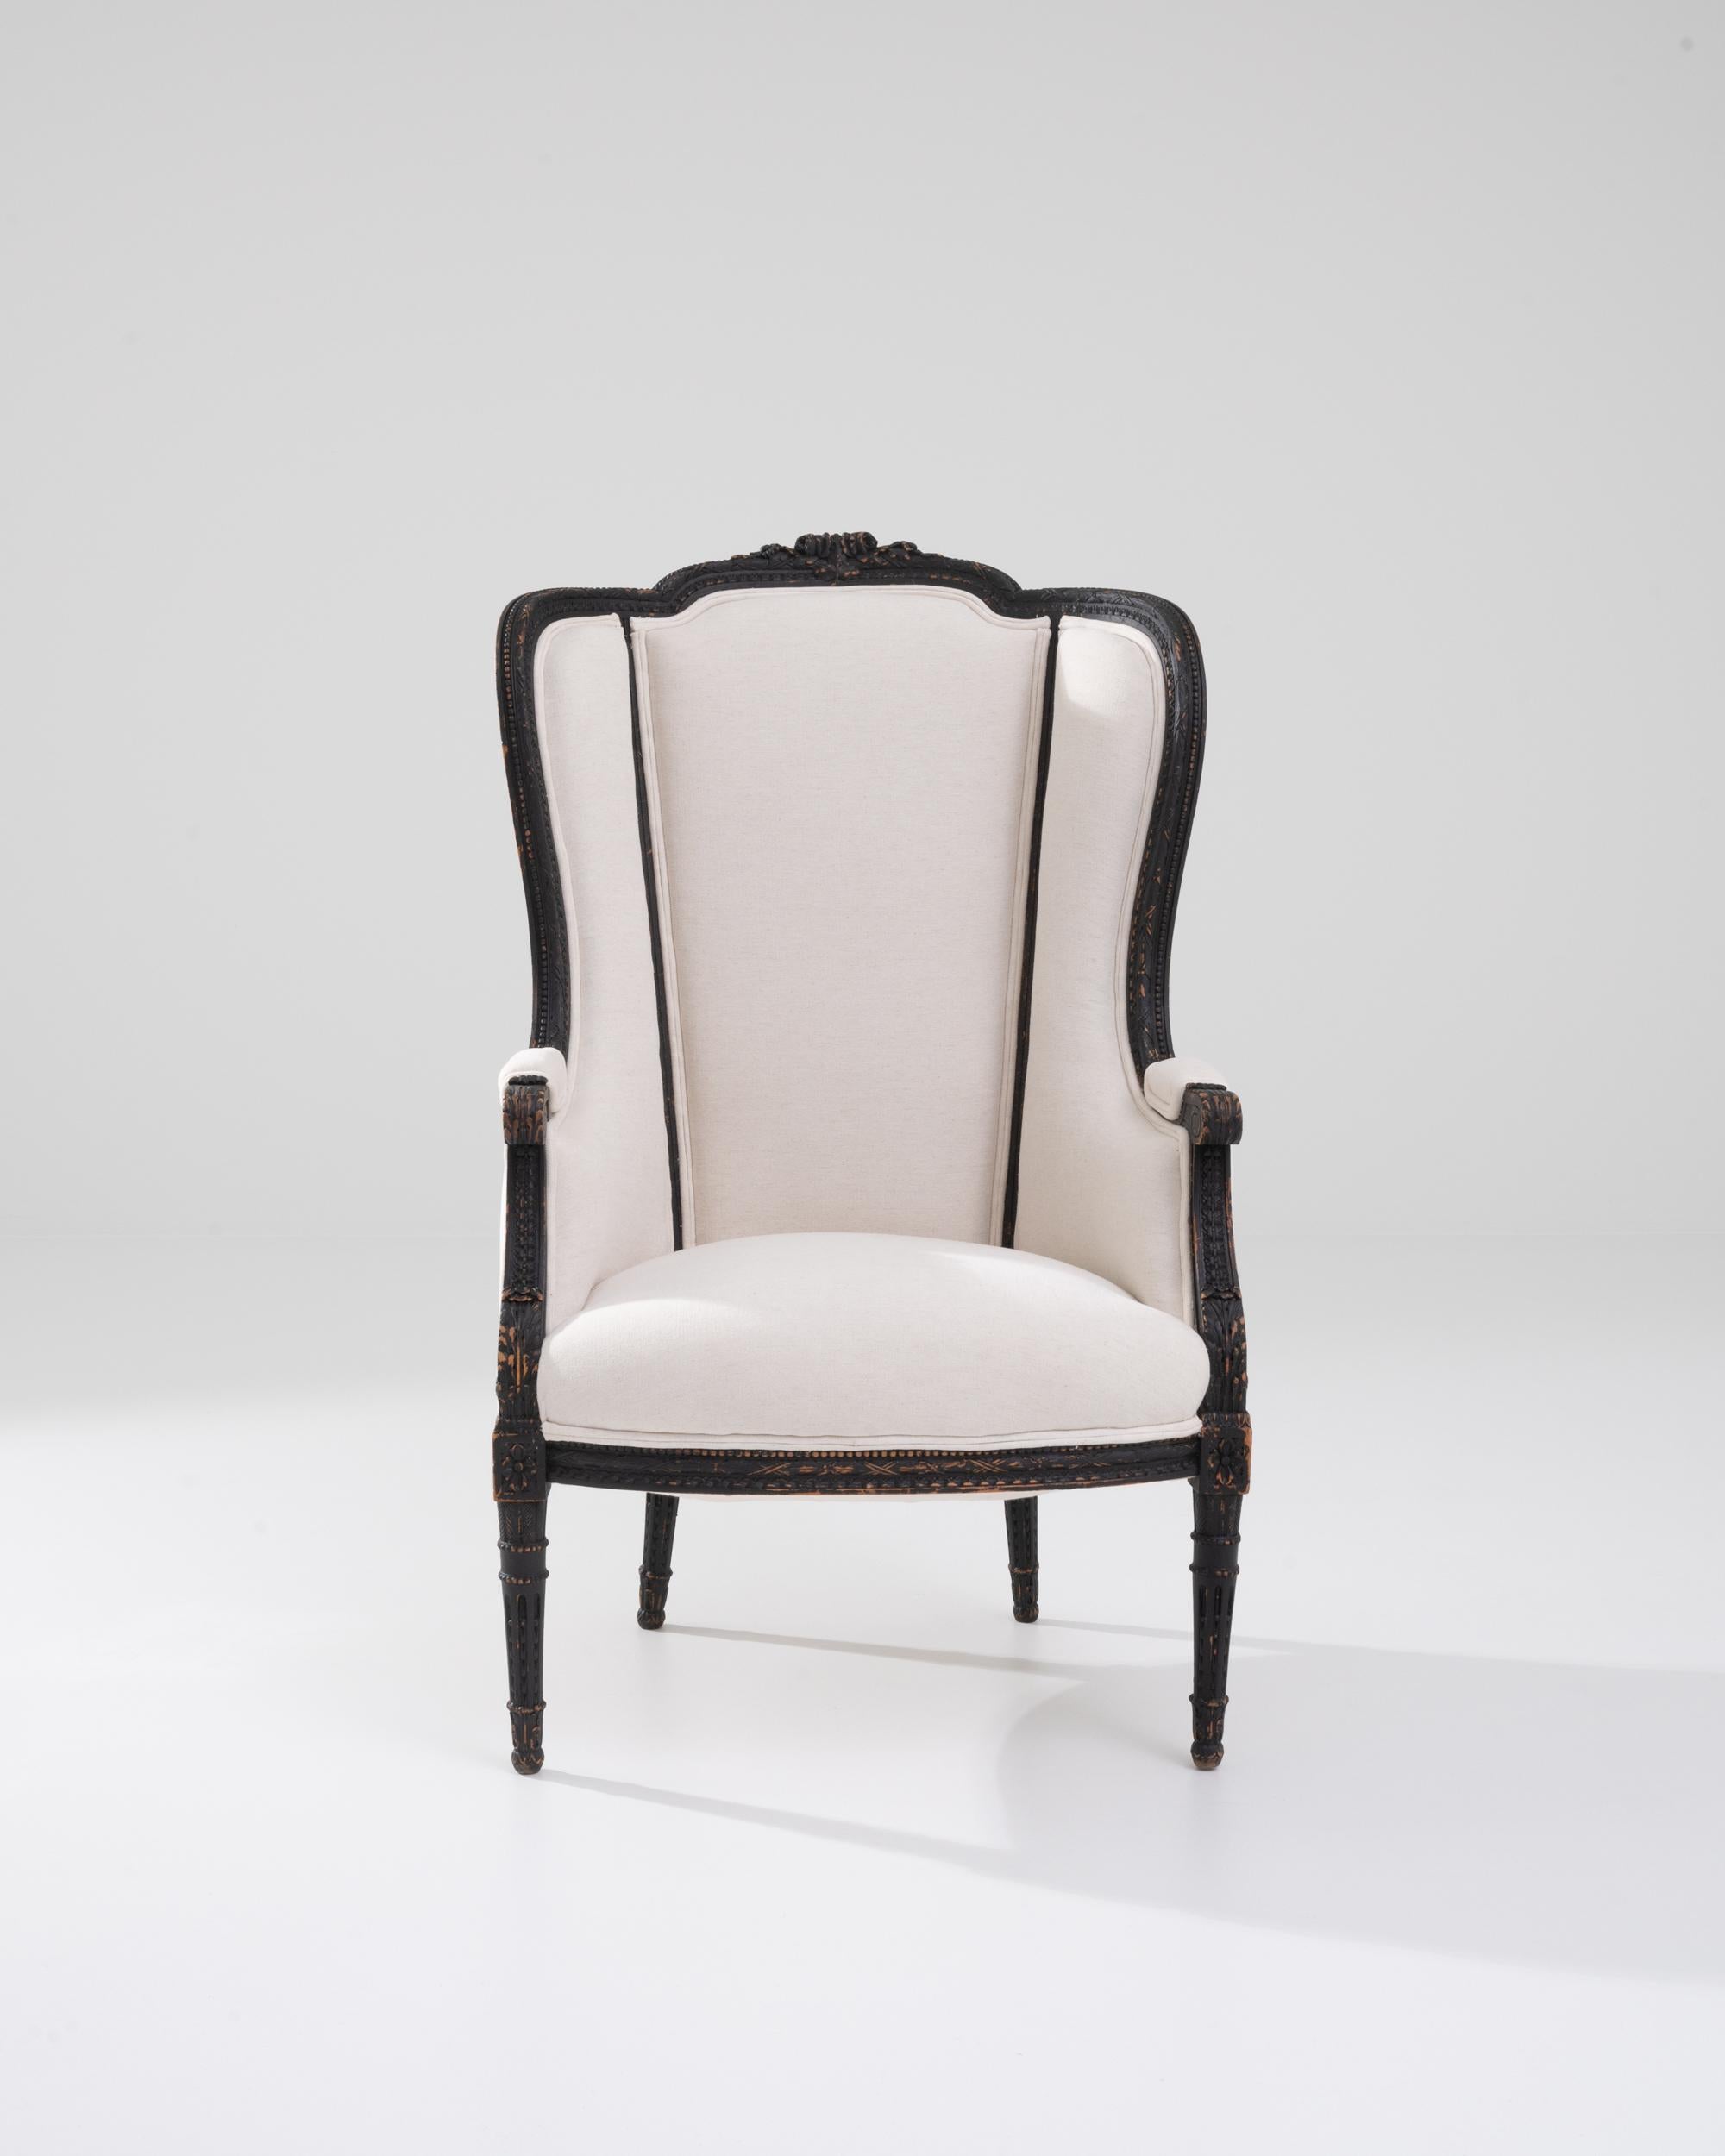 A wooden upholstered armchair created in 20th Century France. This high-backed armchair oozes both an old-world elegance as well as a warm and approachable demeanor. The fresh off-white fabric that dawns its cushioning stands in pleasing contrast to